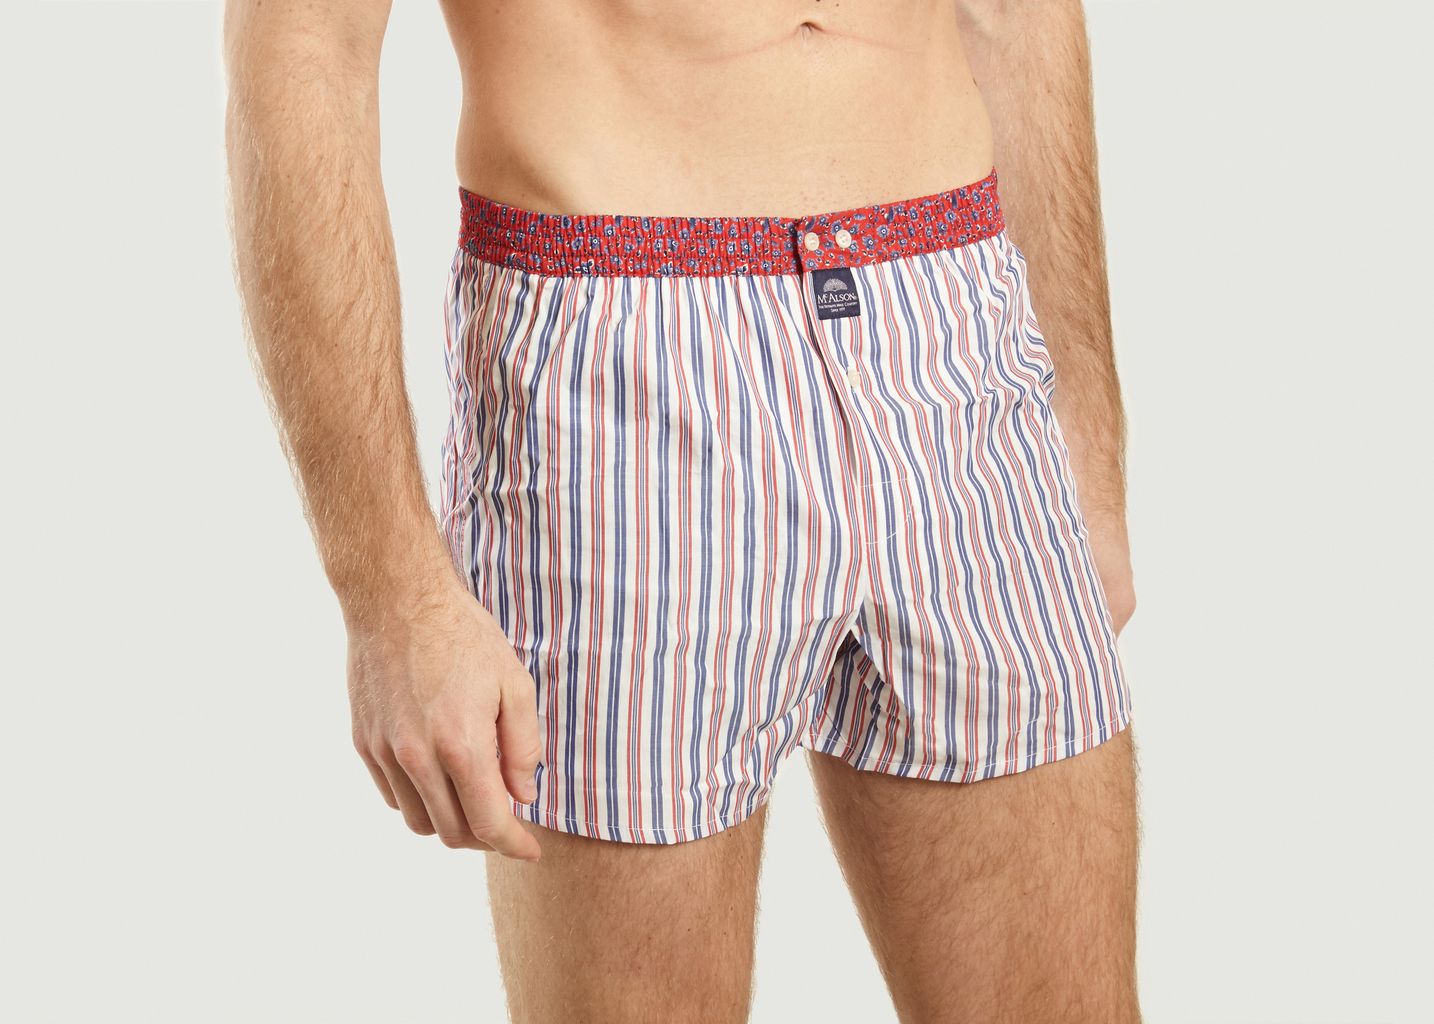 Striped Boxer Shorts With Flowers - Mc Alson